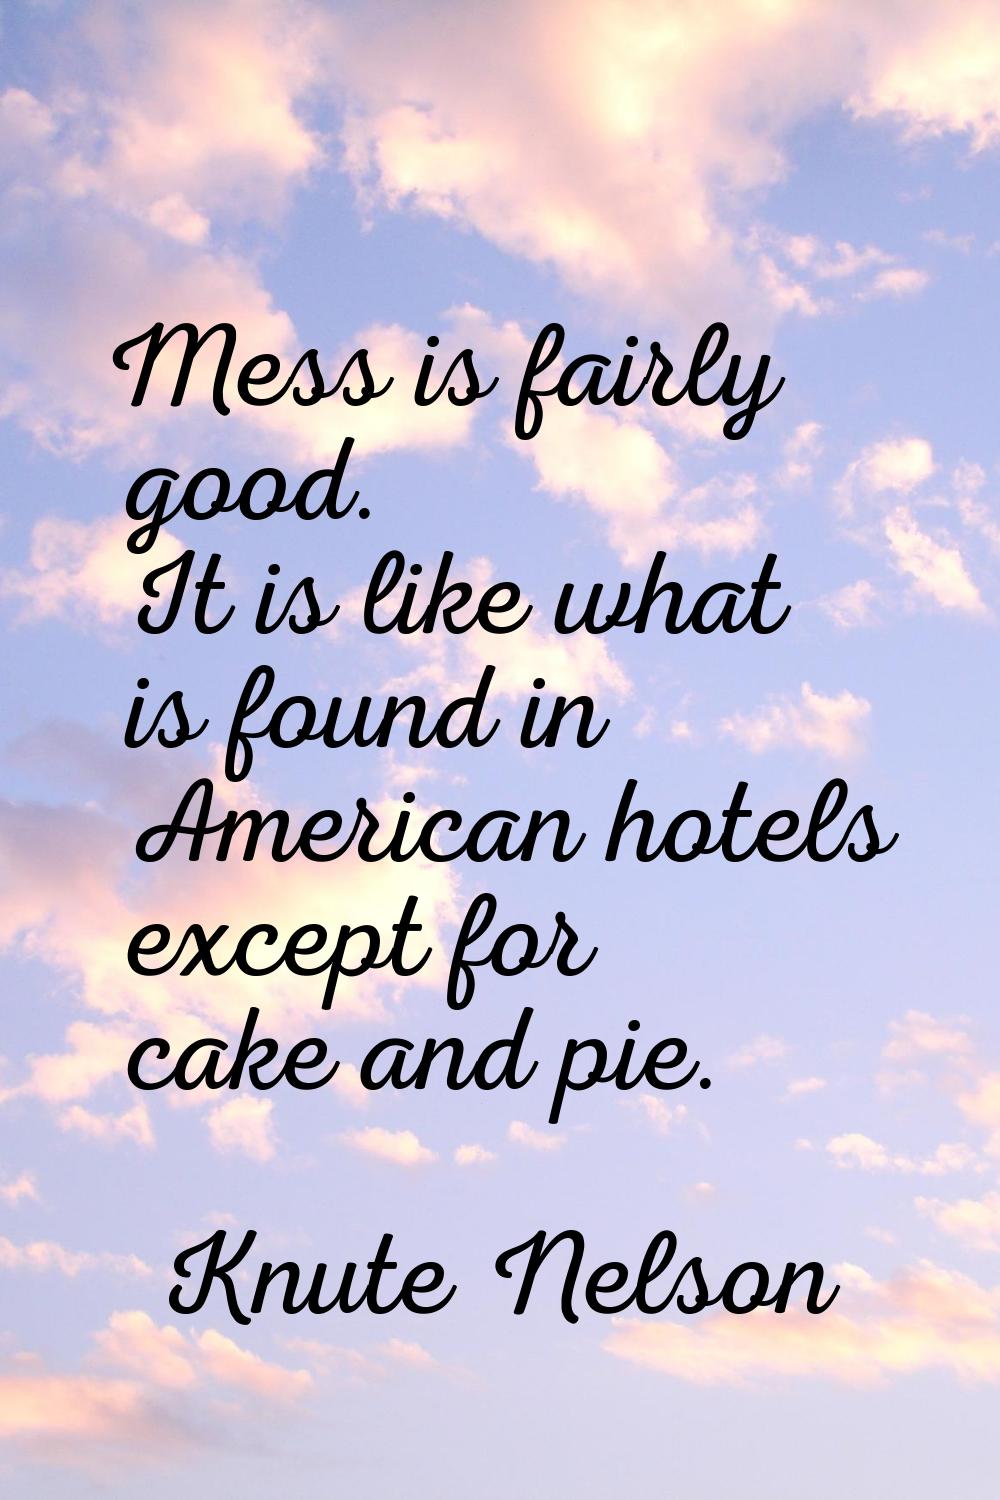 Mess is fairly good. It is like what is found in American hotels except for cake and pie.